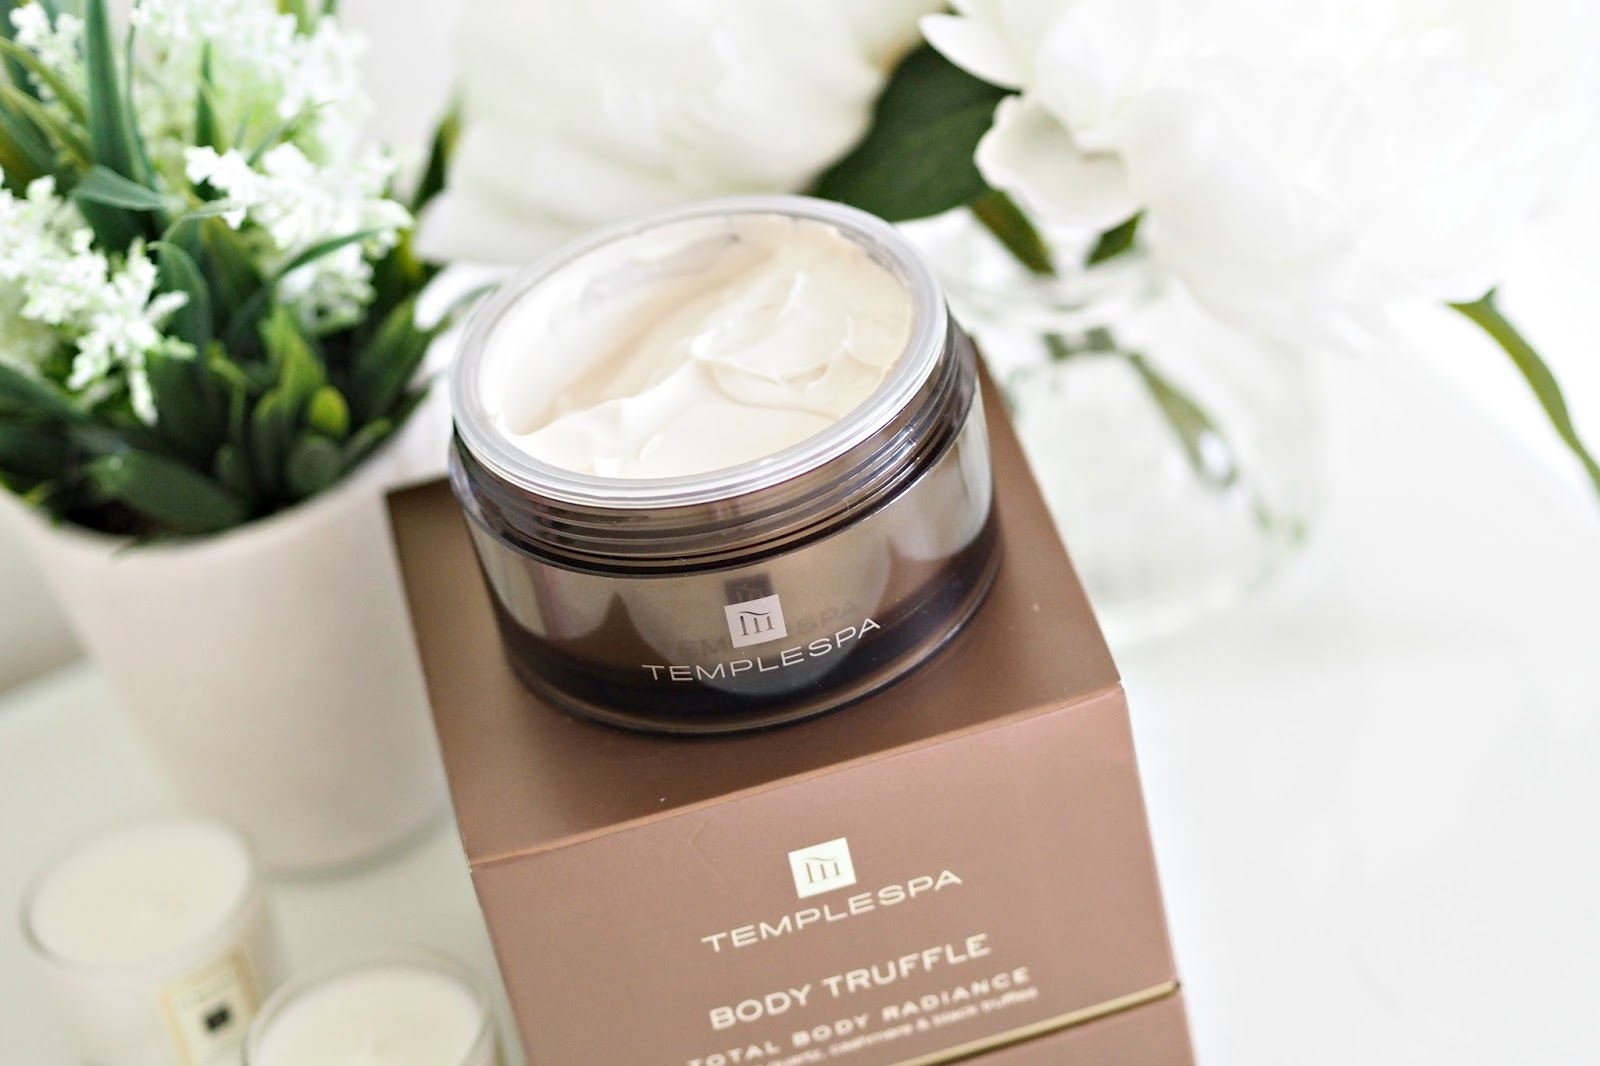 Temple Spa Body Truffle review